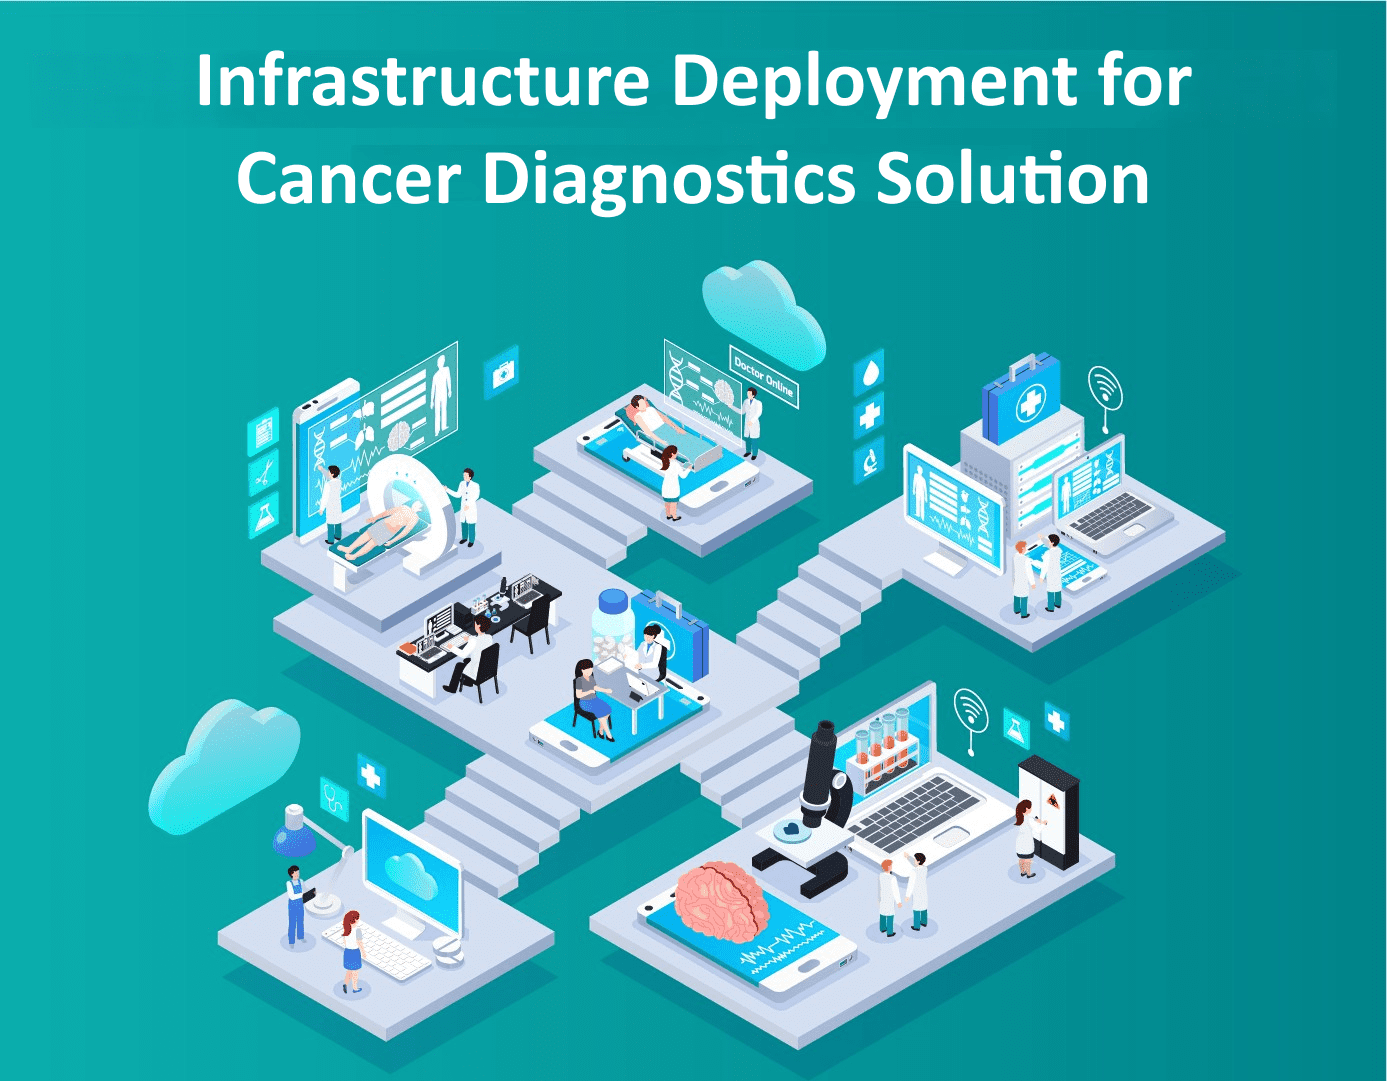 Robust infrastructure for cancer diagnostics and medication software, revolutionizing healthcare with accurate and efficient solutions